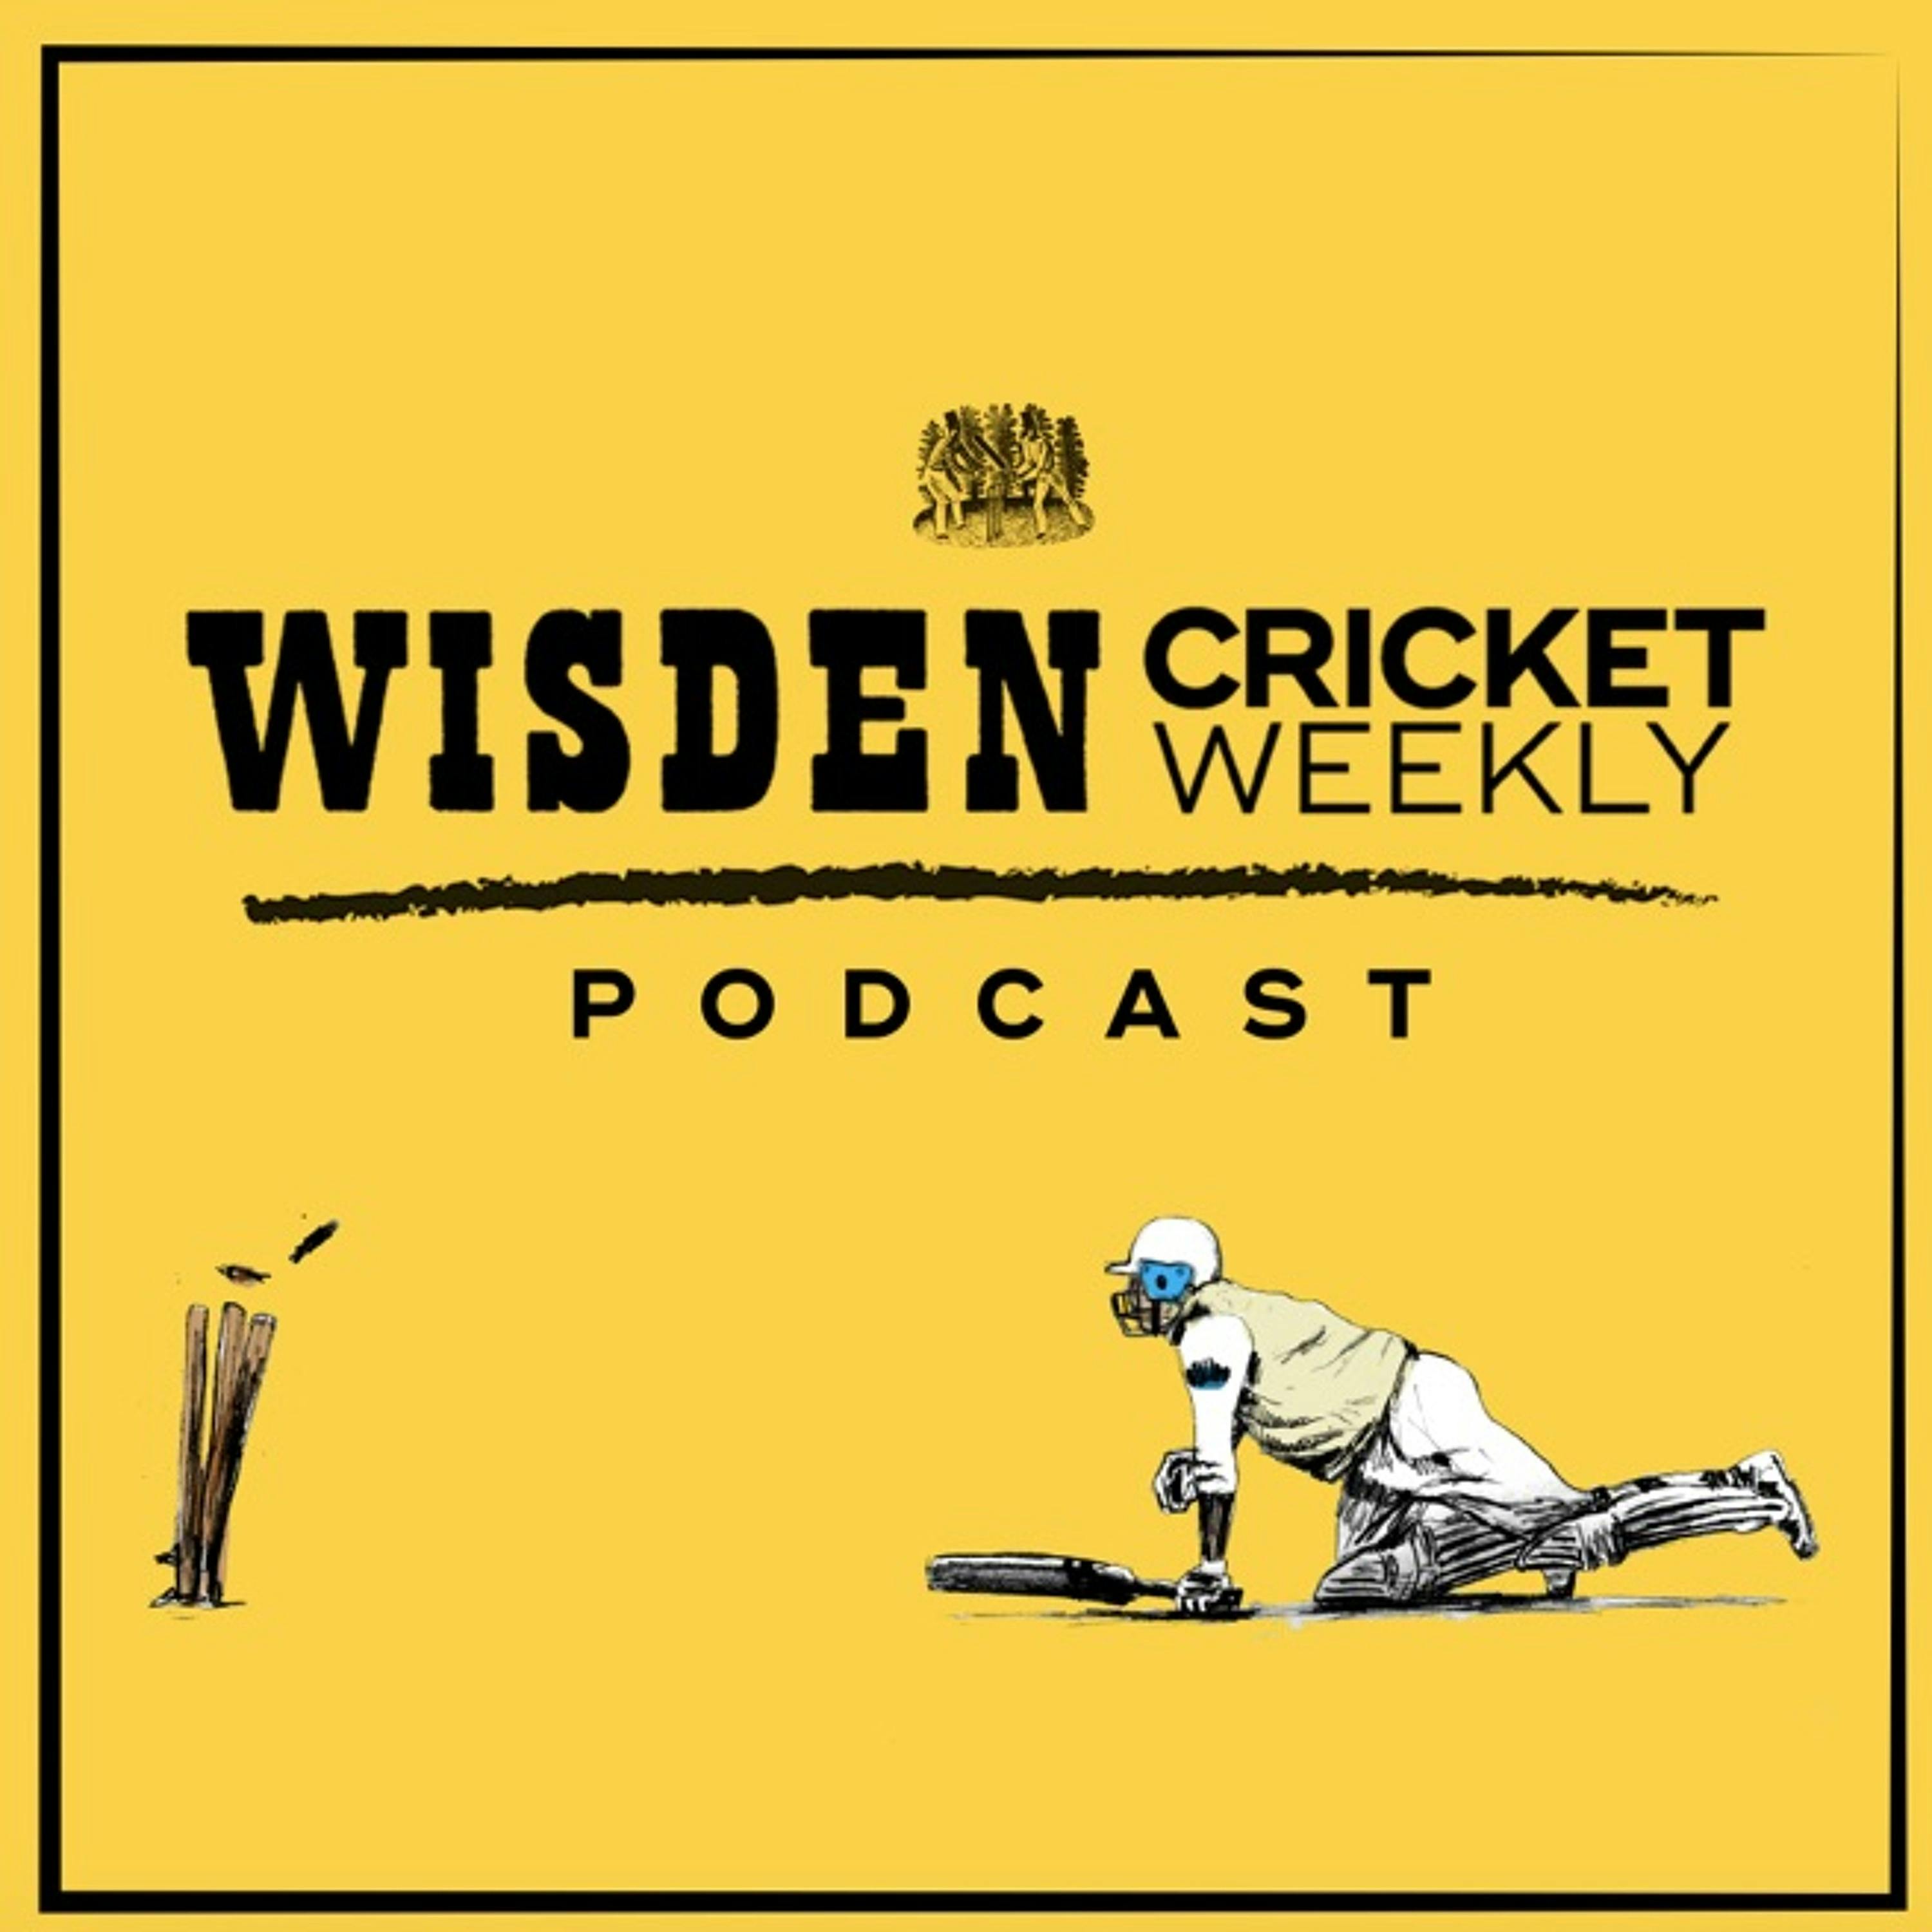 Wisden Cricket Weekly Episode 1 - Rain, Tim Paine, And Match Fixing Shame